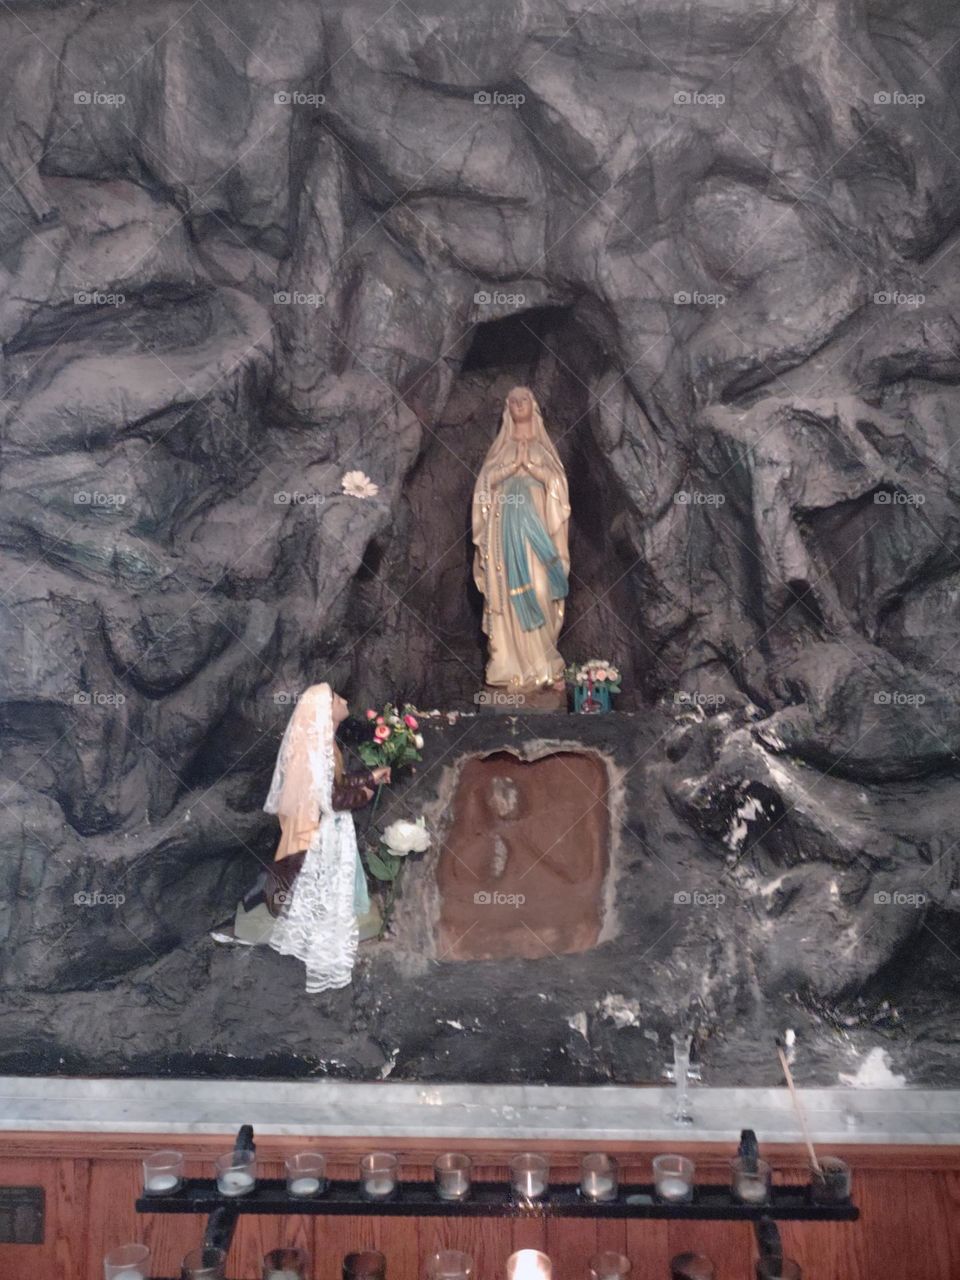 Grotto shrine to St. Bernadette and Lourdes. This apparition inspired the Miraculous Medal.